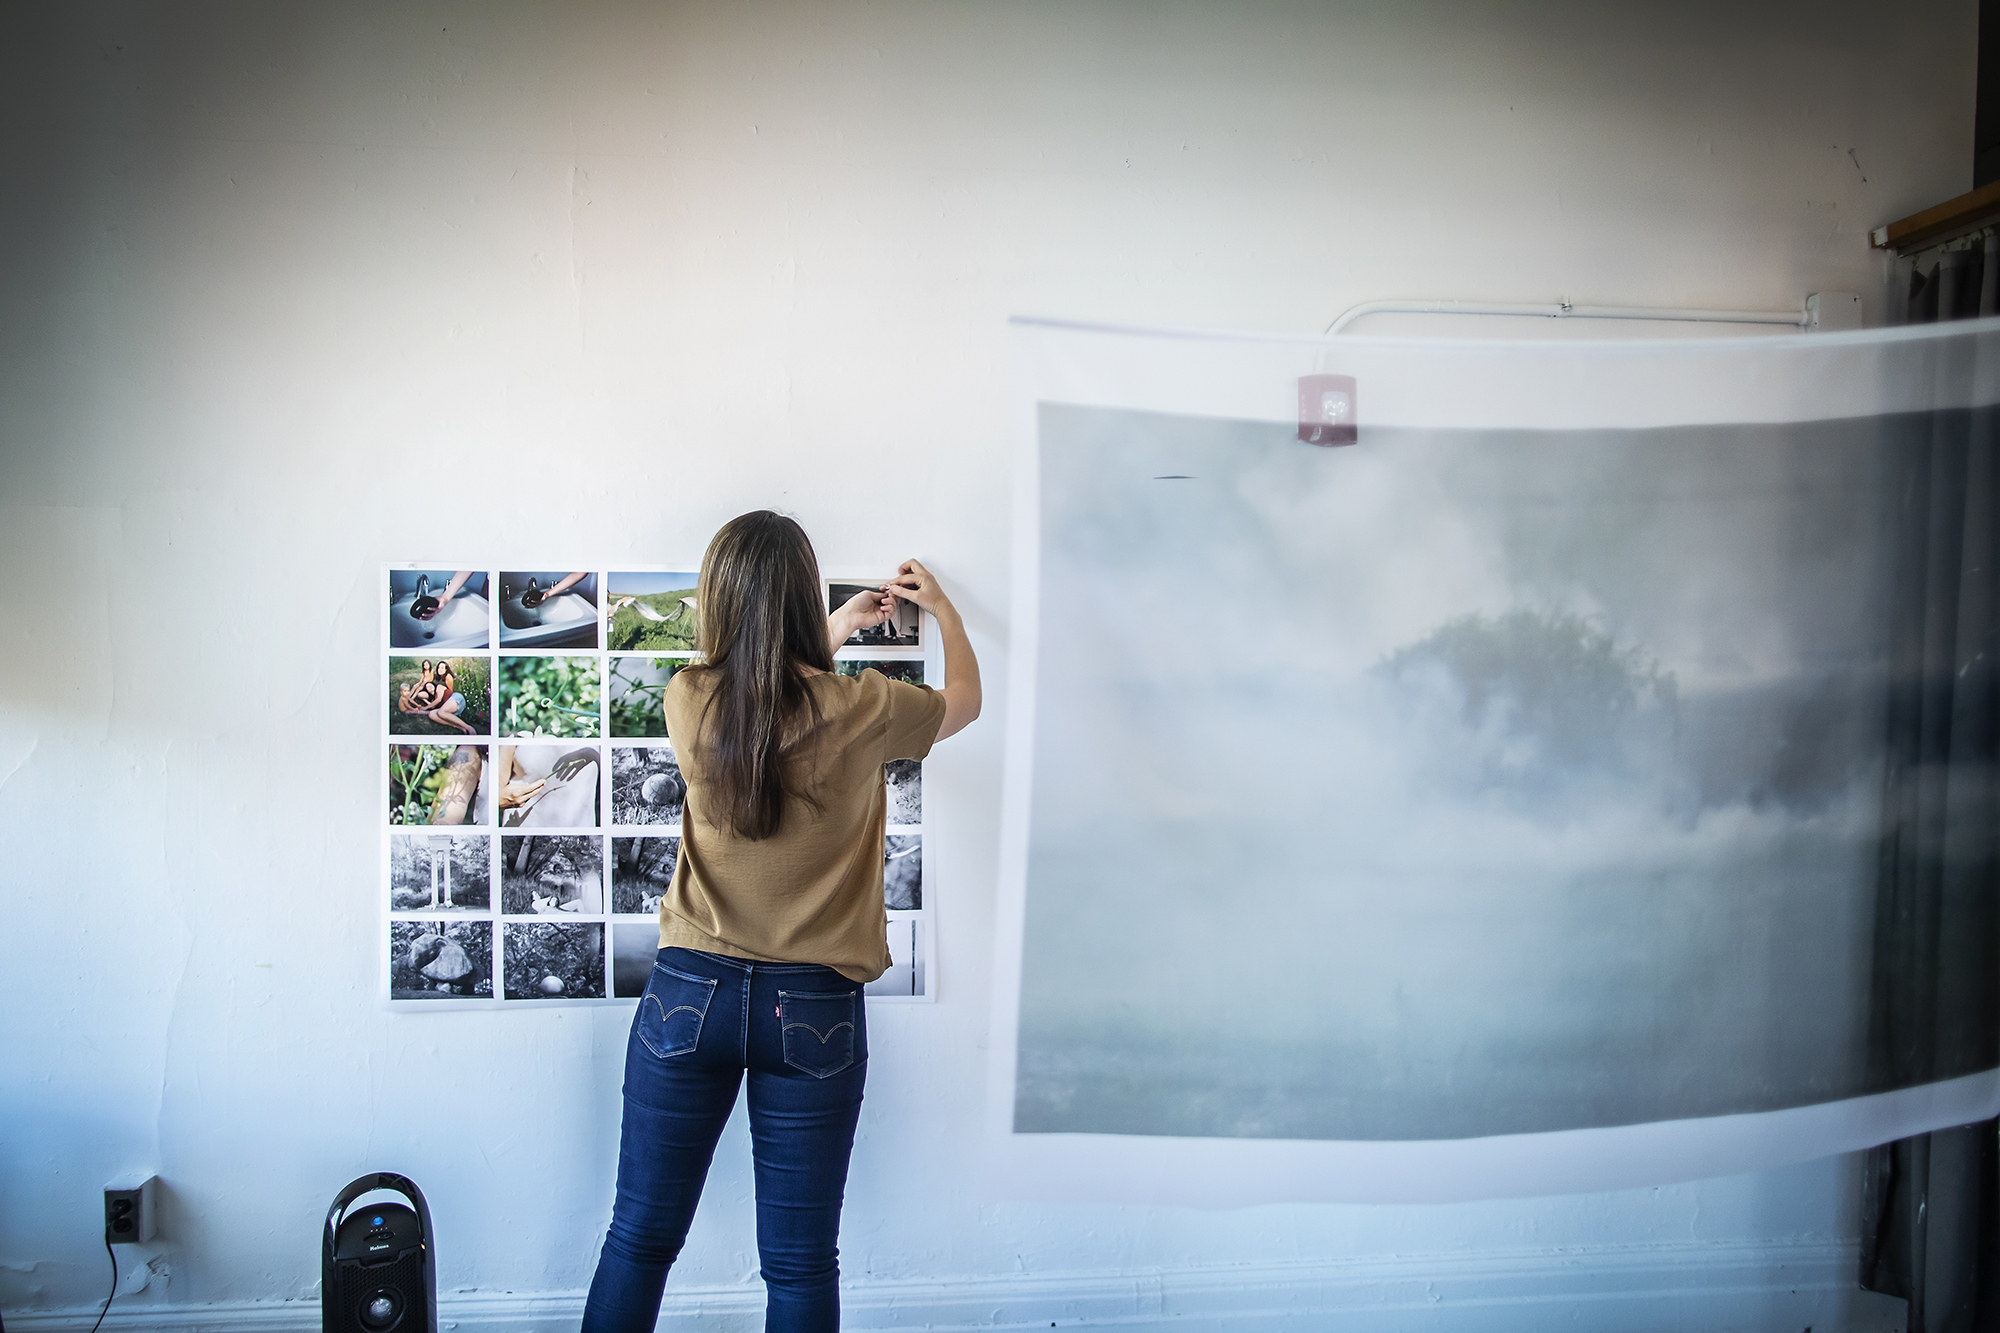 Amrita Stützle in her studio with back turned to camera pins a grid of images to her wall. 